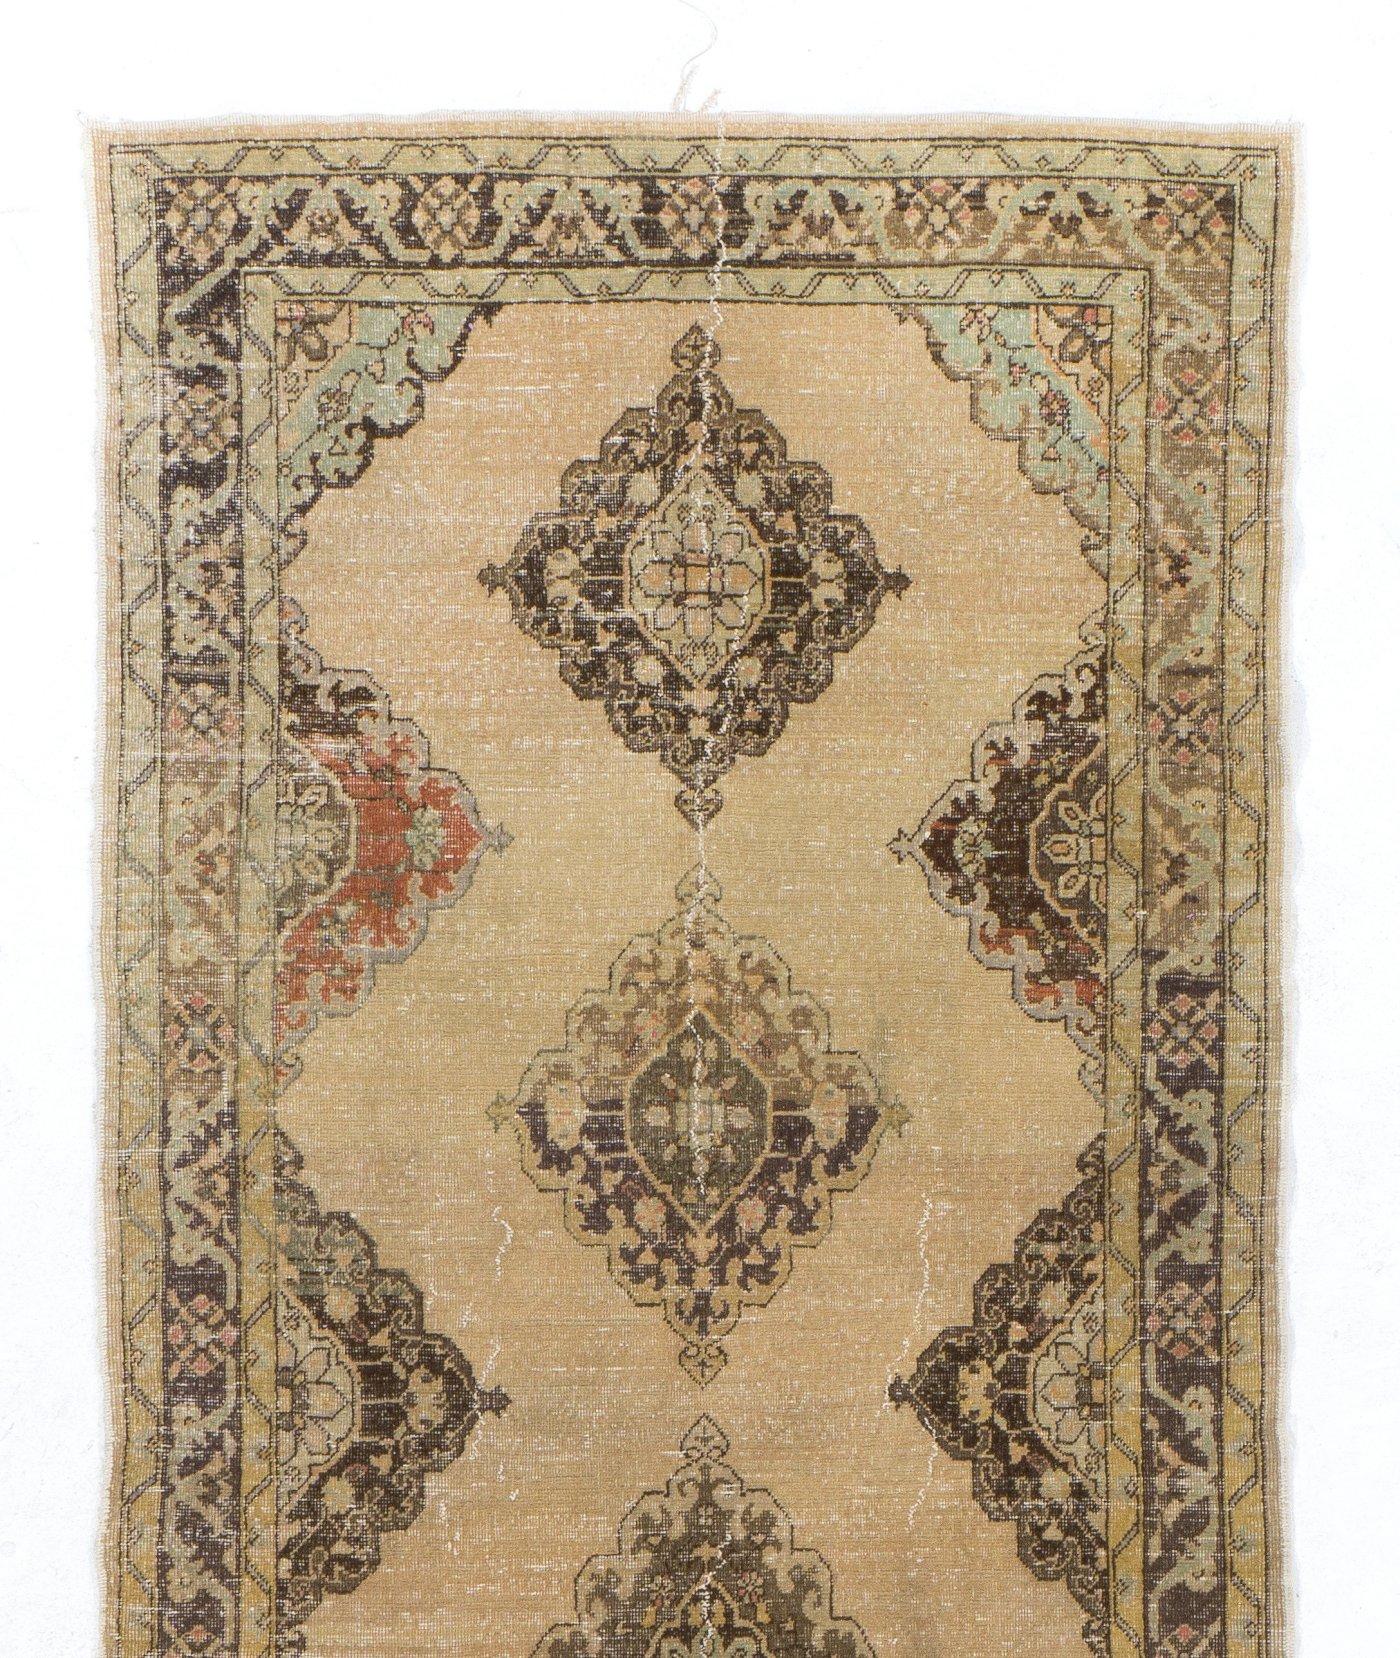 A mid 20th century hand knotted runner from Central Anatolia. Measures: 5 x 12.7 ft
Low wool on cotton foundation. Natural colors.
Good condition, sturdy and as clean as a brand new rug, washed professionally.